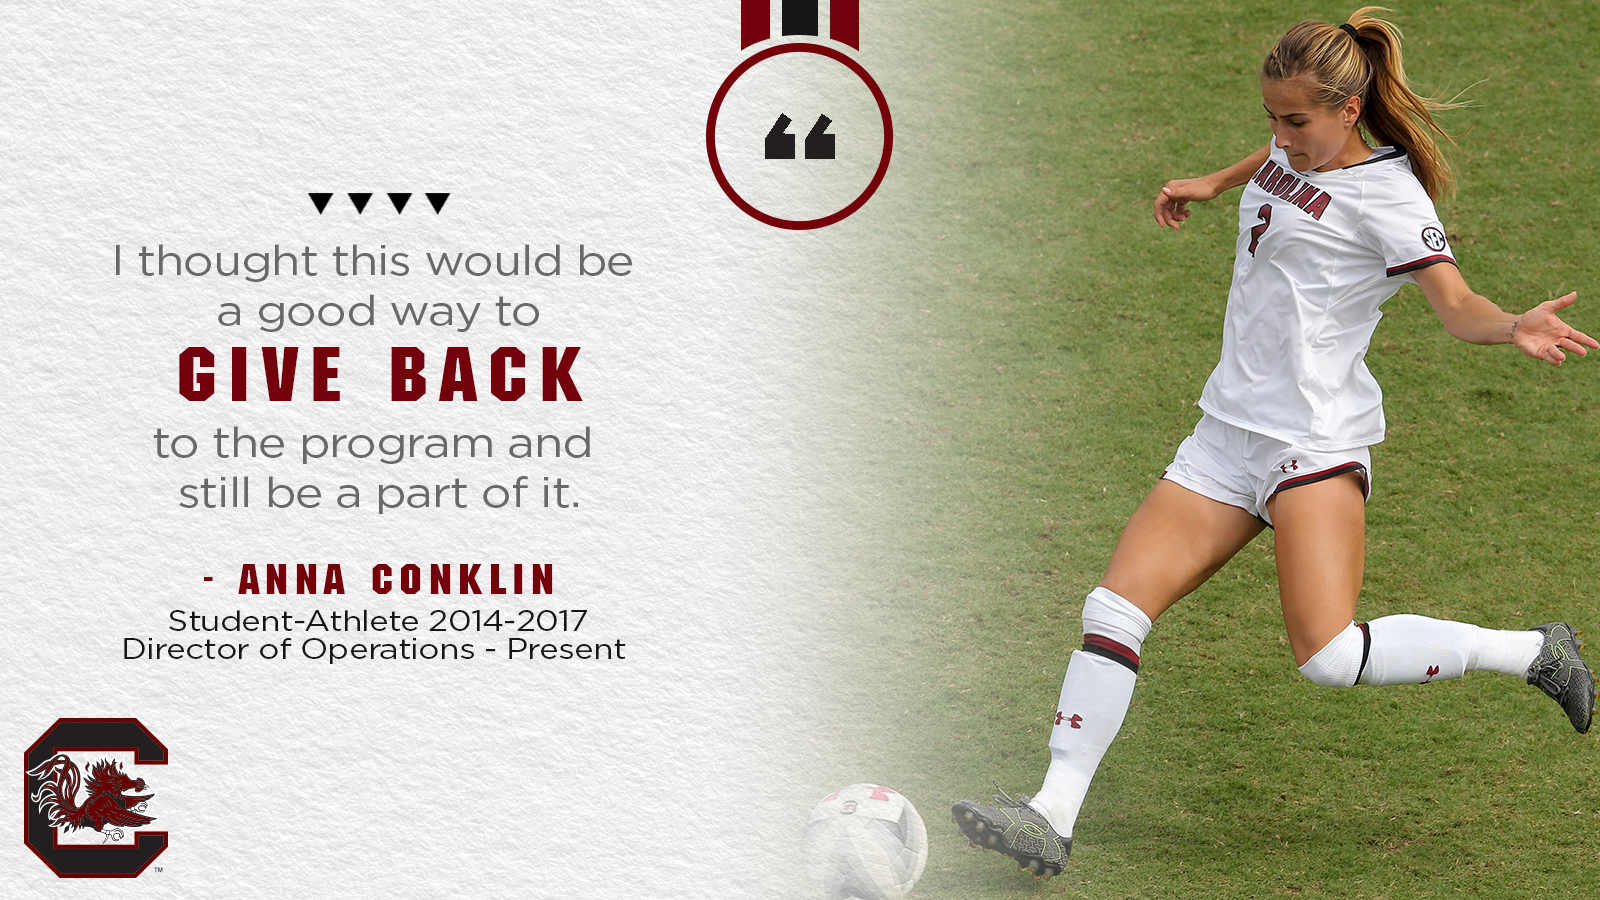 Conklin Tackles New Role with Women's Soccer Program